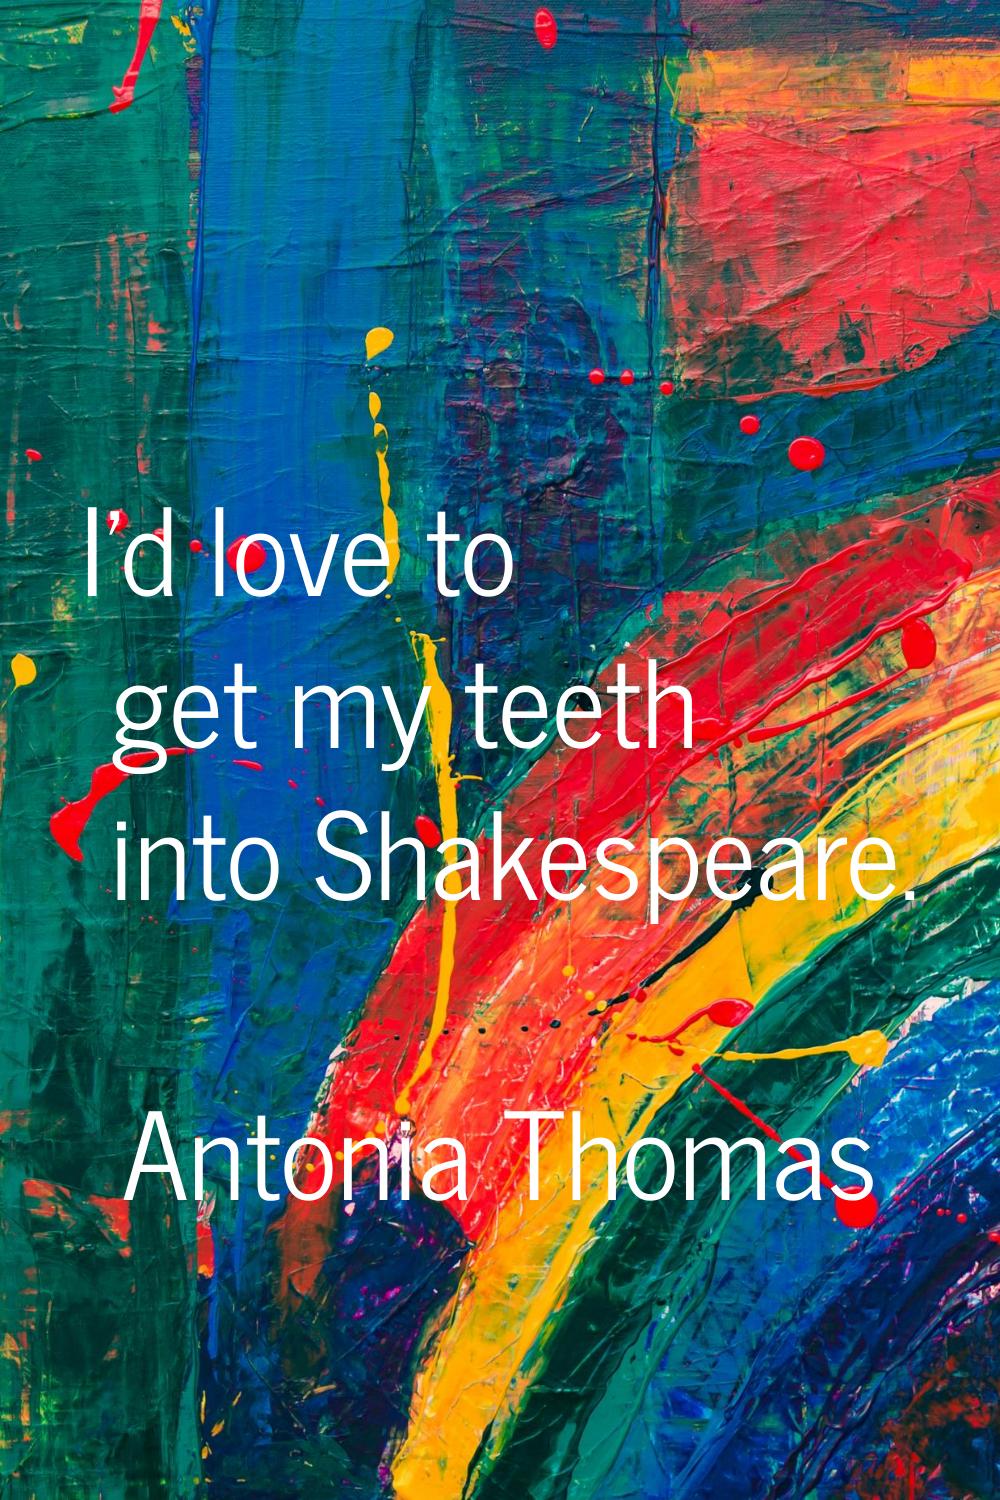 I'd love to get my teeth into Shakespeare.